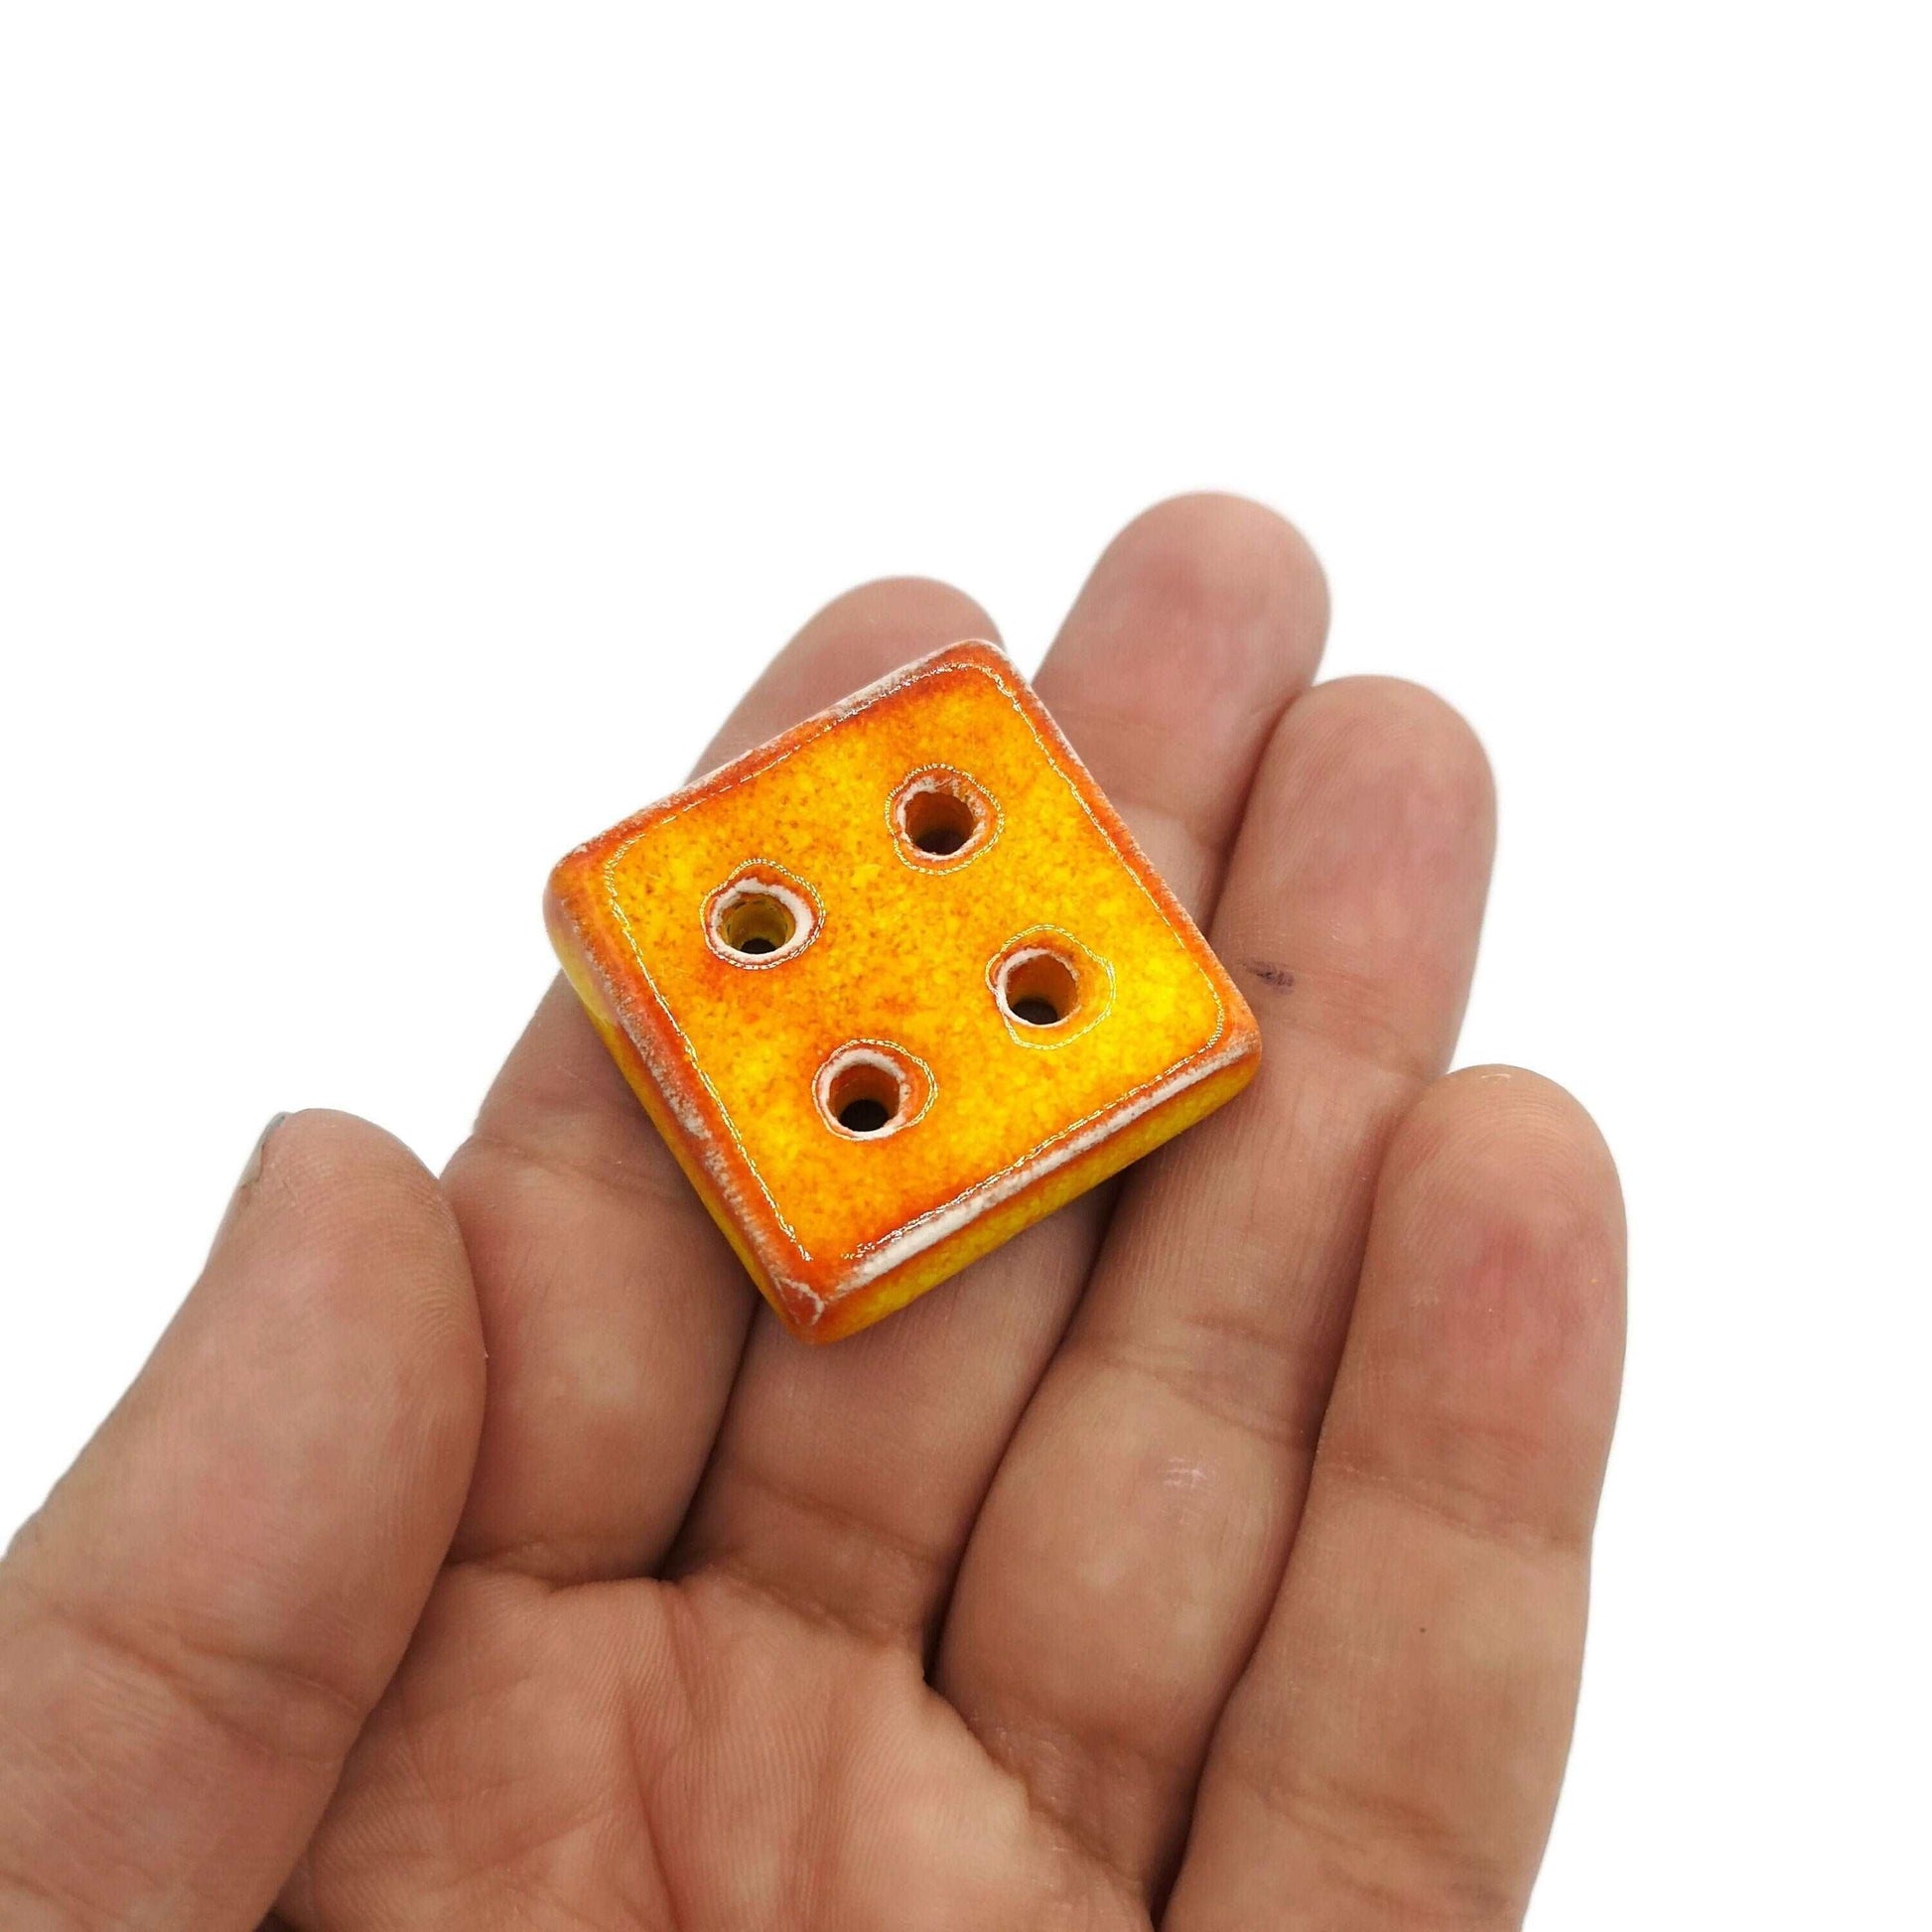 1Pc 30mm Orange Square Ceramic Buttons, Cute Pottery Coat Buttons, Best Sellers Sewing Supplies And Notions, Handmade Button Antique Look